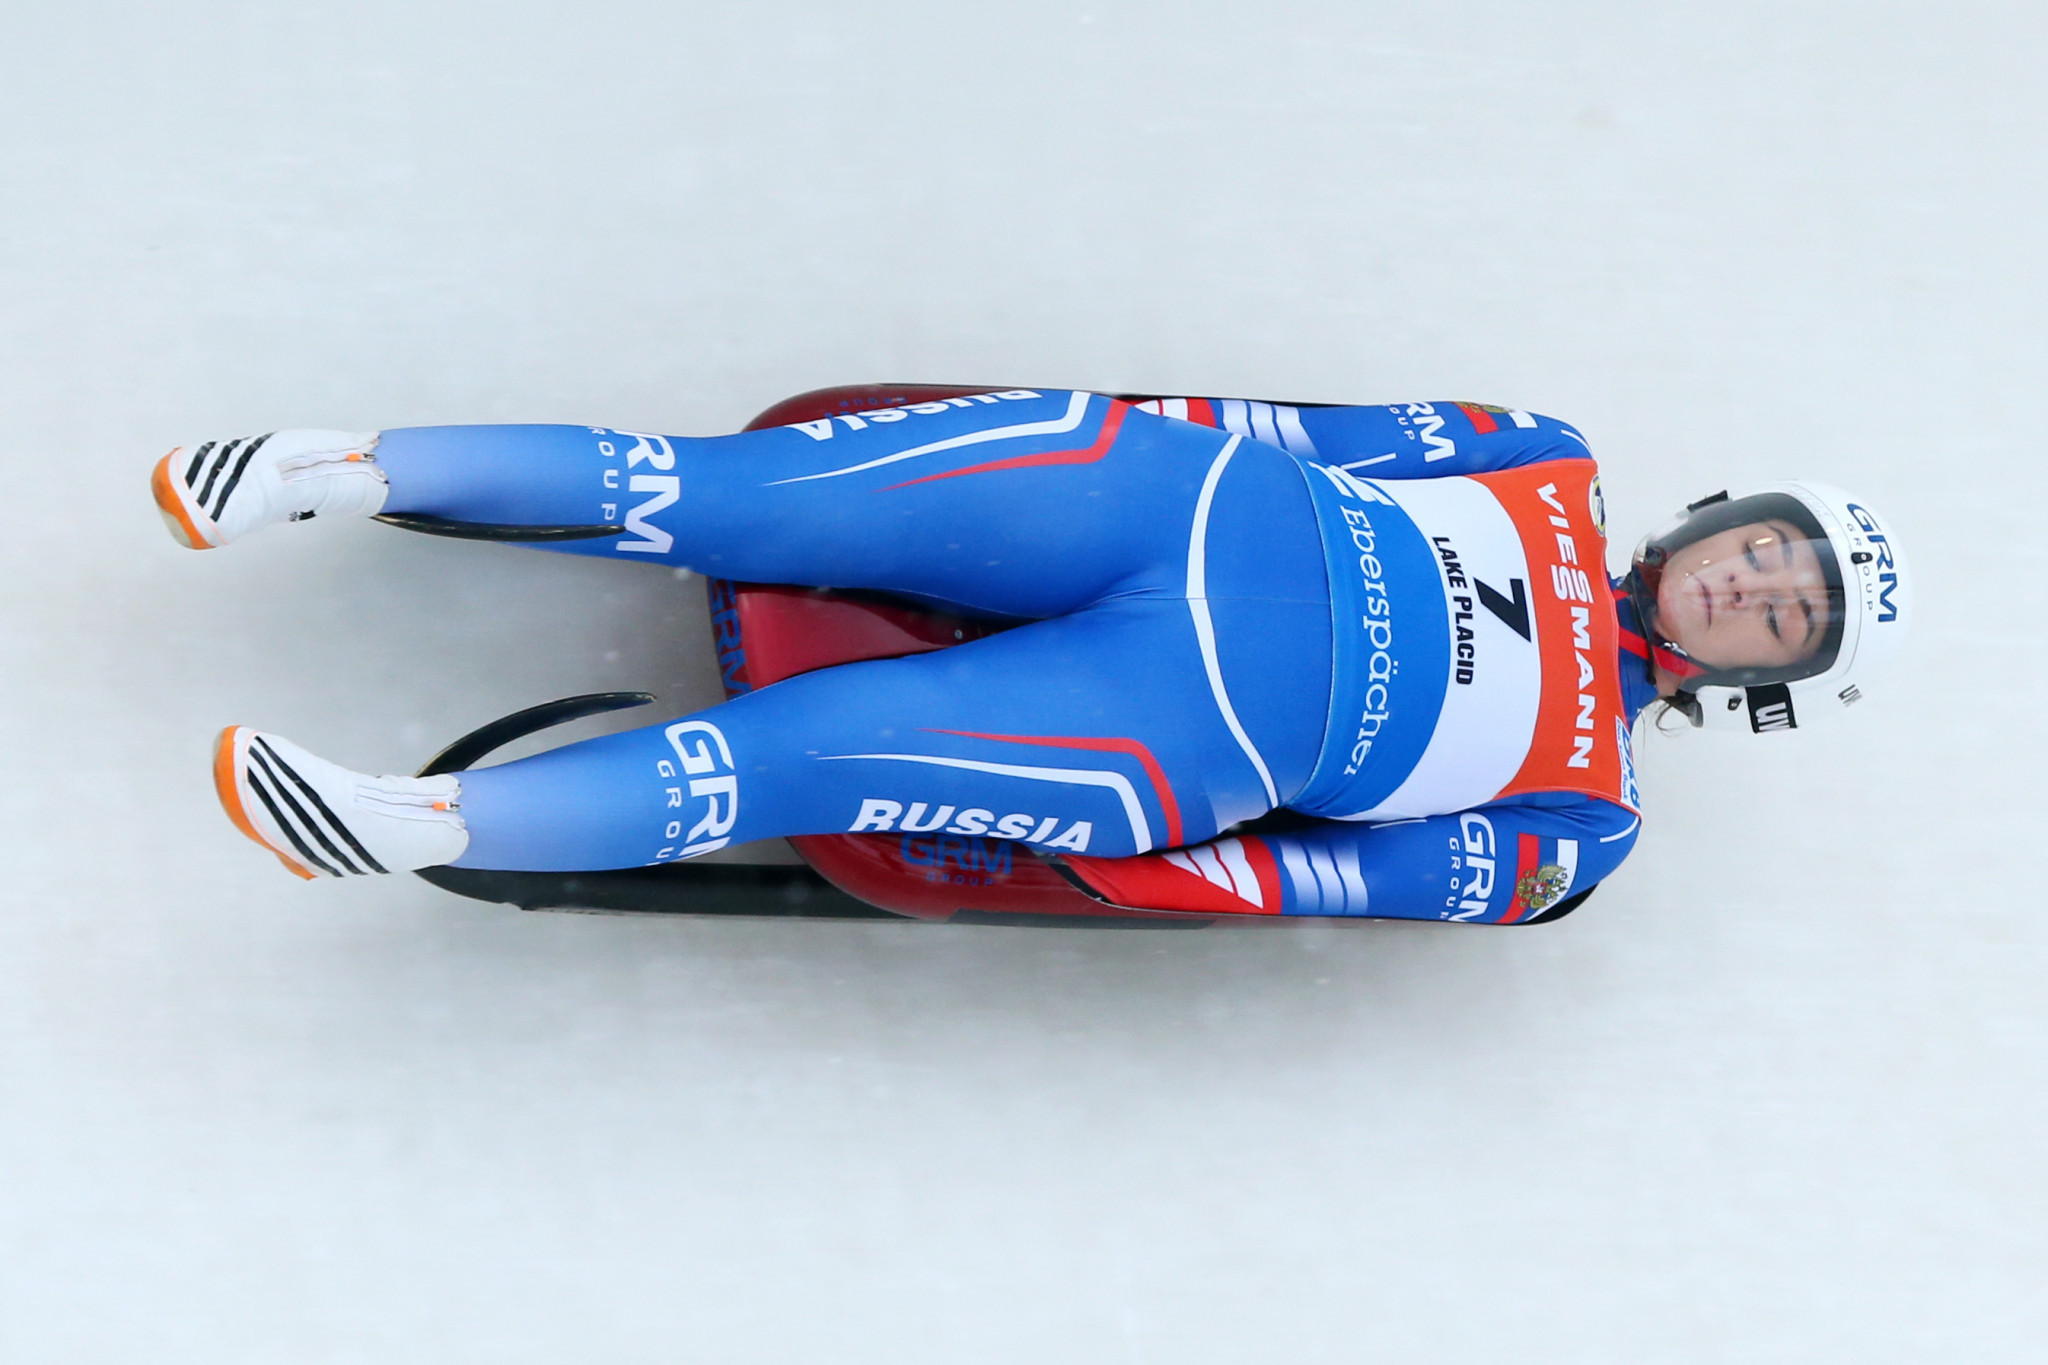 Katnikova wins women's singles to secure second title at Luge World Championships